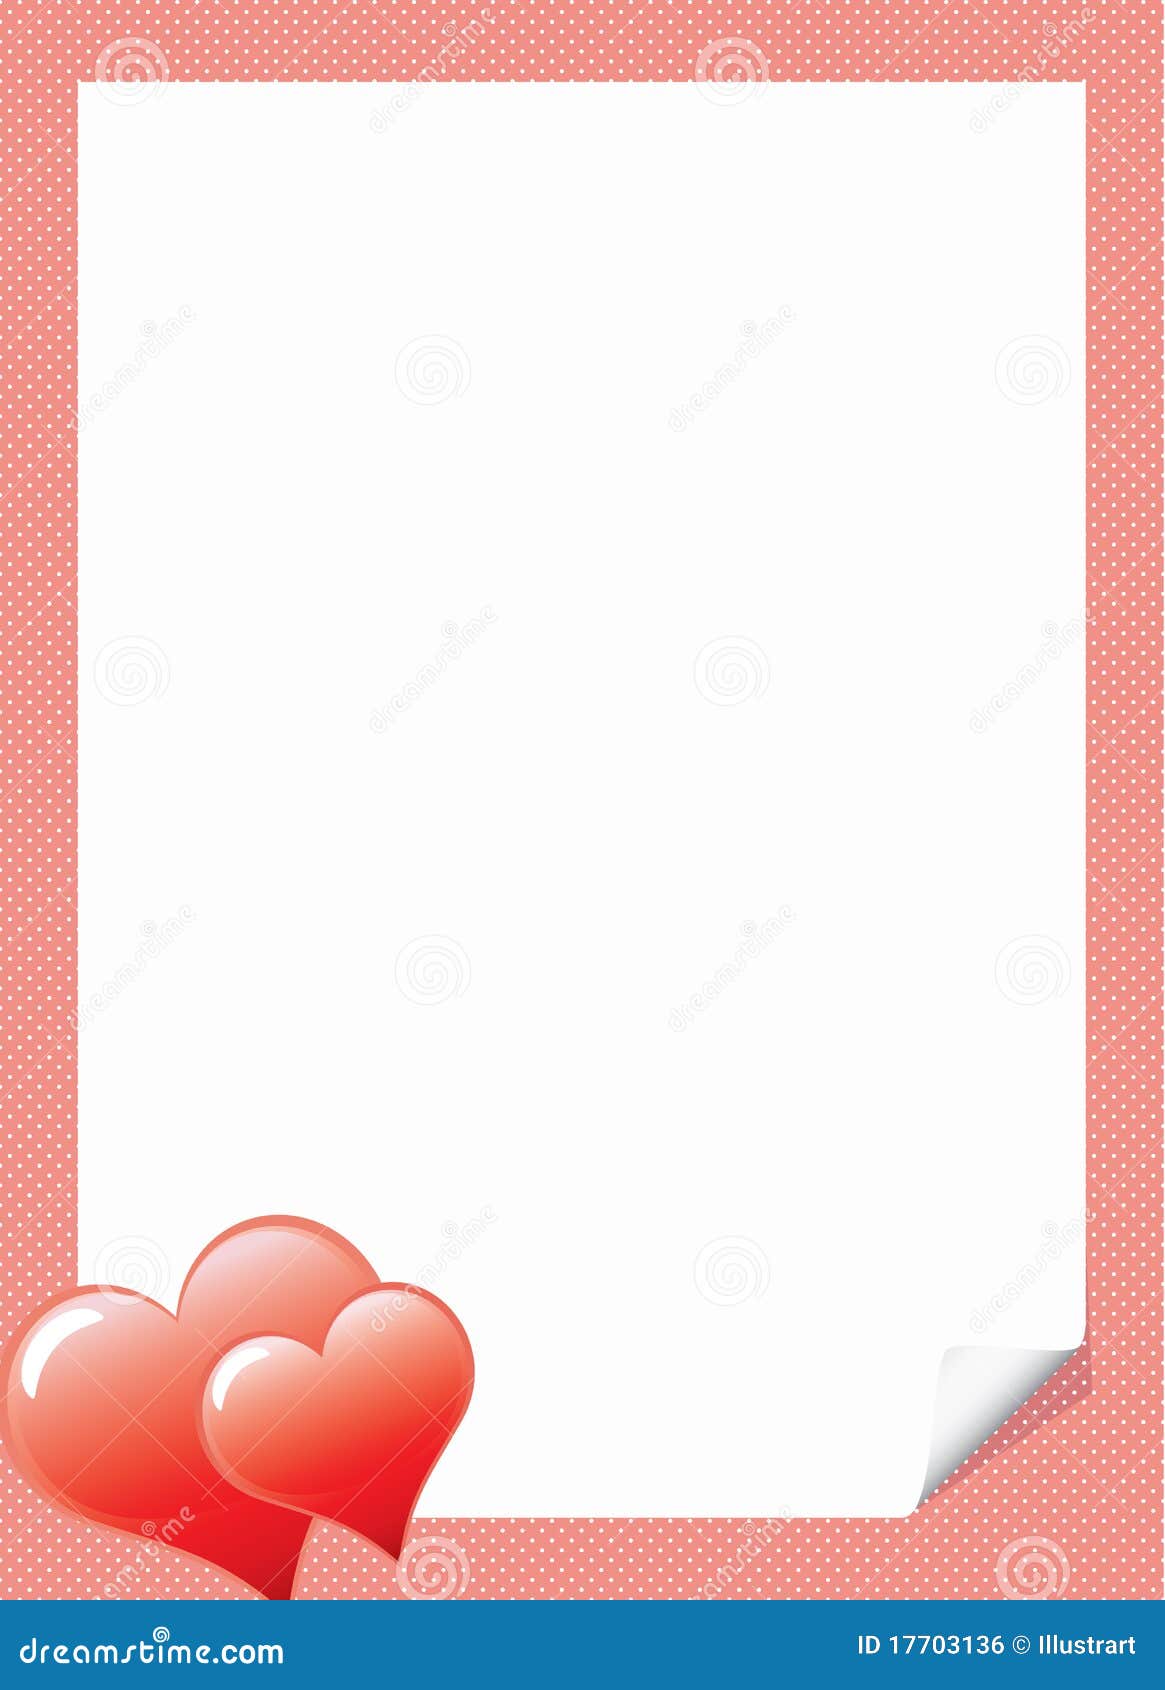 Love Letter Template Hearts Stock Illustrations – 20,6204 Love In Template For Love Letter